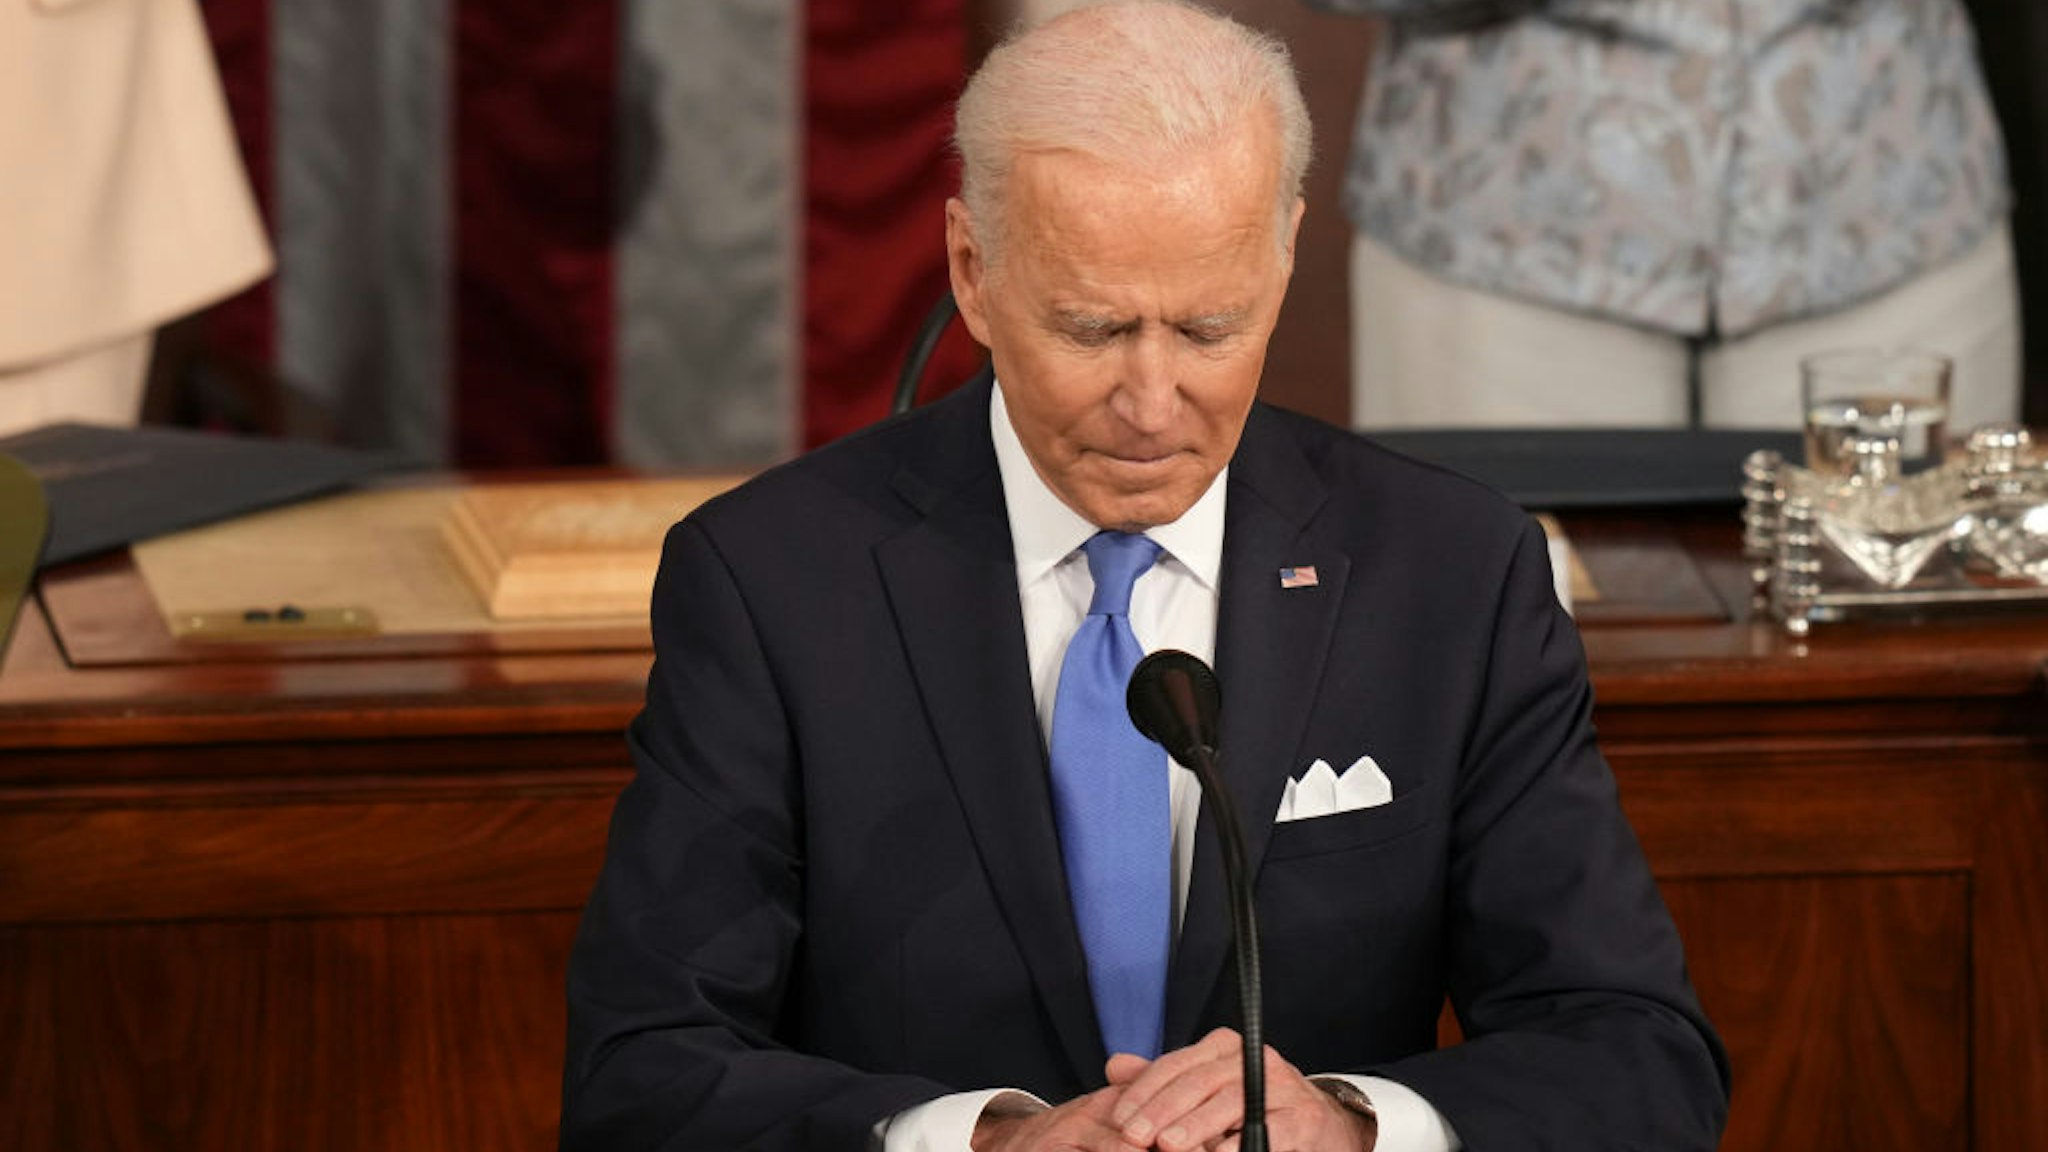 U.S. President Joe Biden pauses while speaking during a joint session of Congress at the U.S. Capitol in Washington, D.C., U.S., on Wednesday, April 28, 2021.